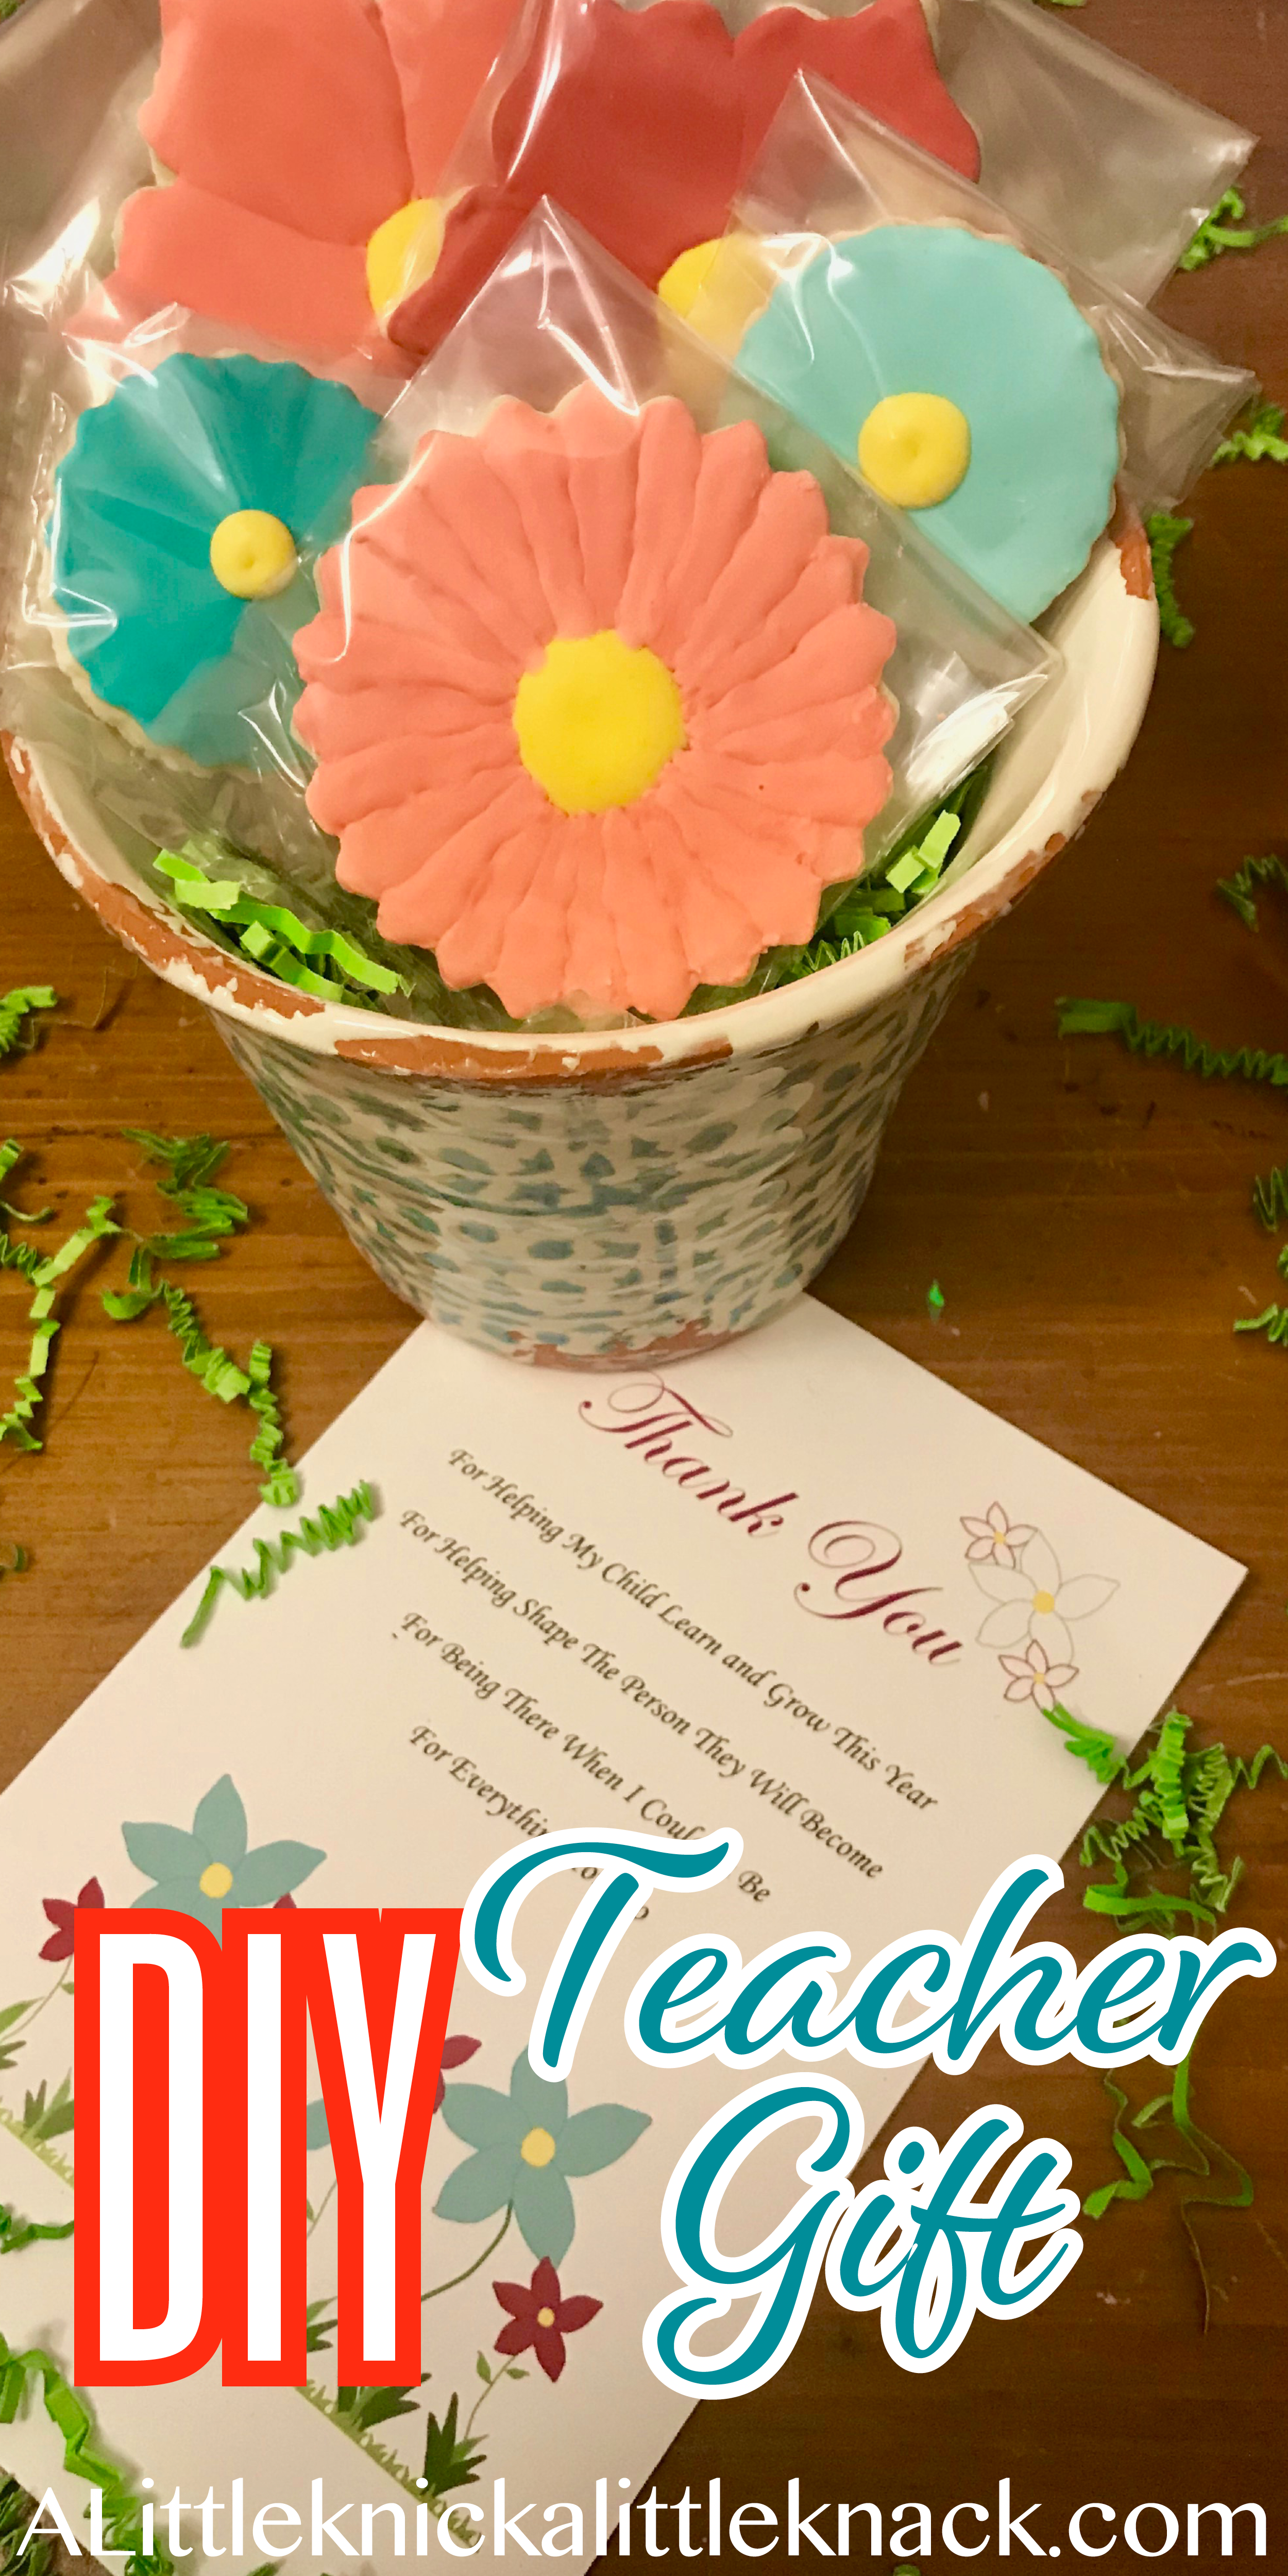 A beautiful teacher appreciation gift and printable thank you card for all they have done to help your child learn and grow.